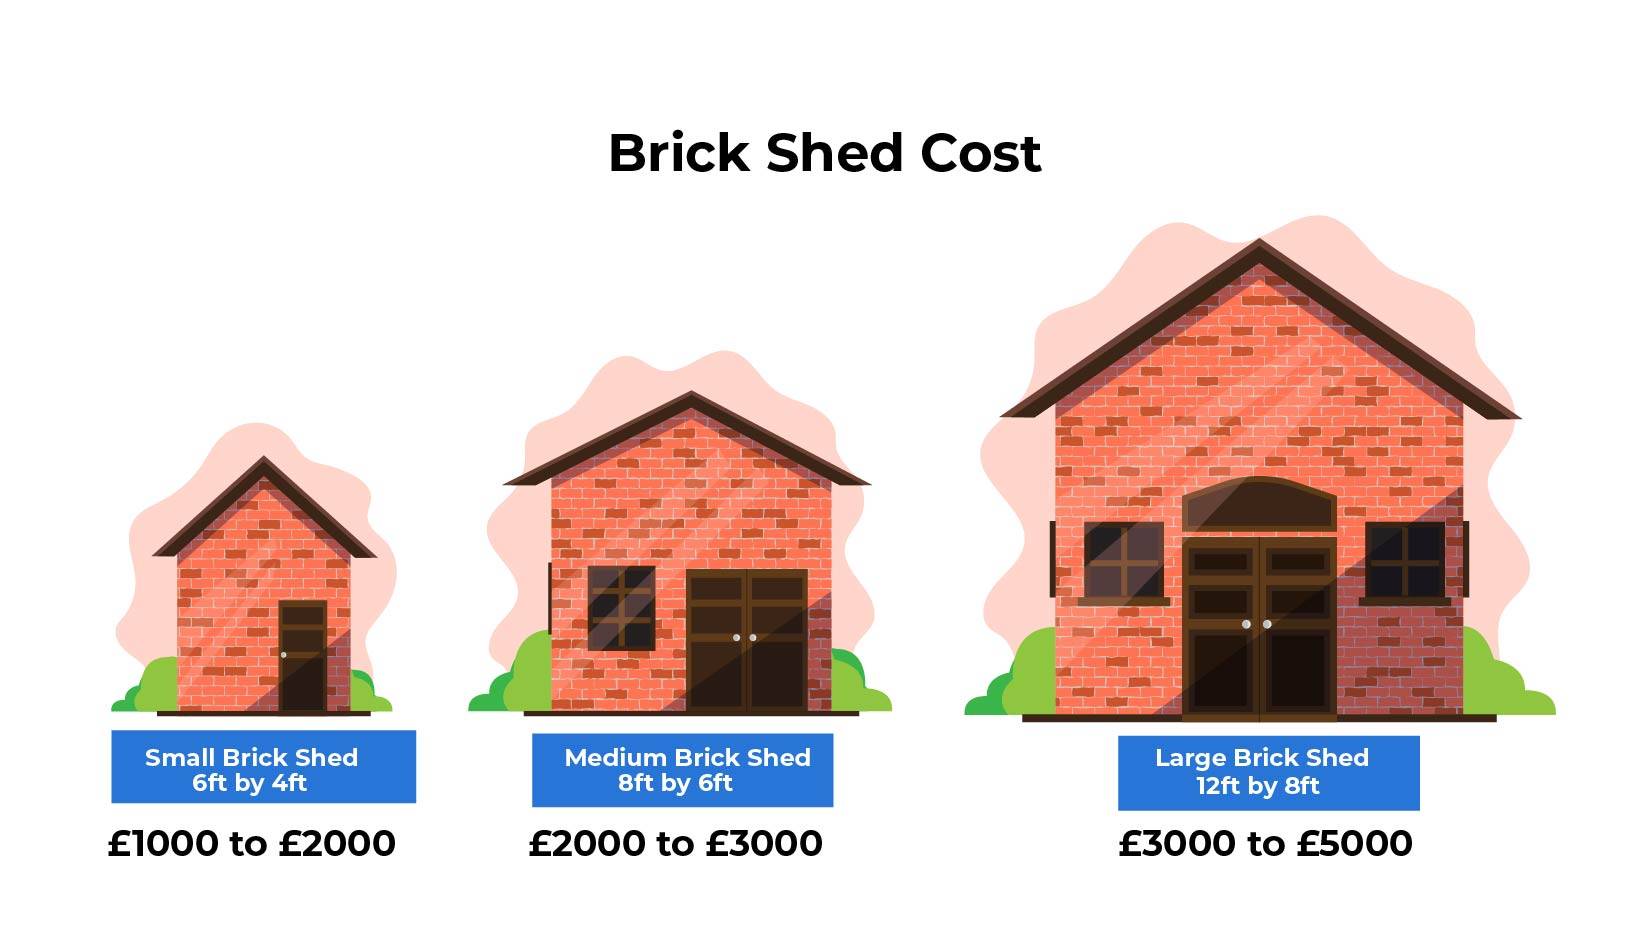 Brick shed prices